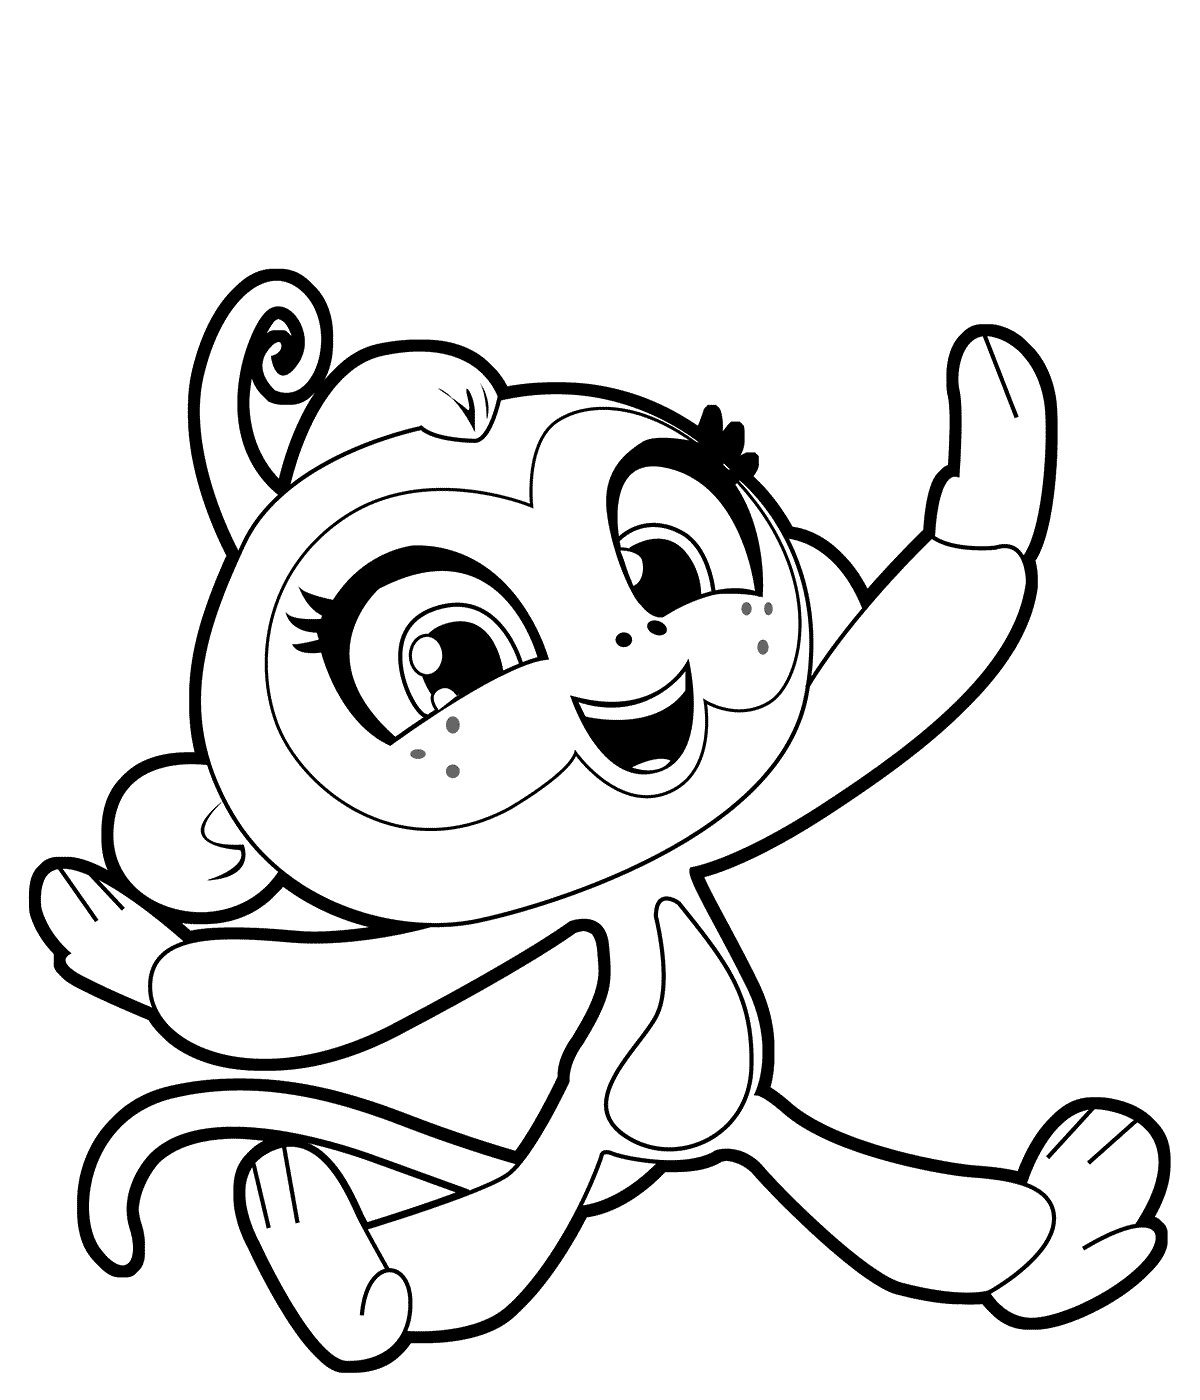 Fingerlingss Coloring Page